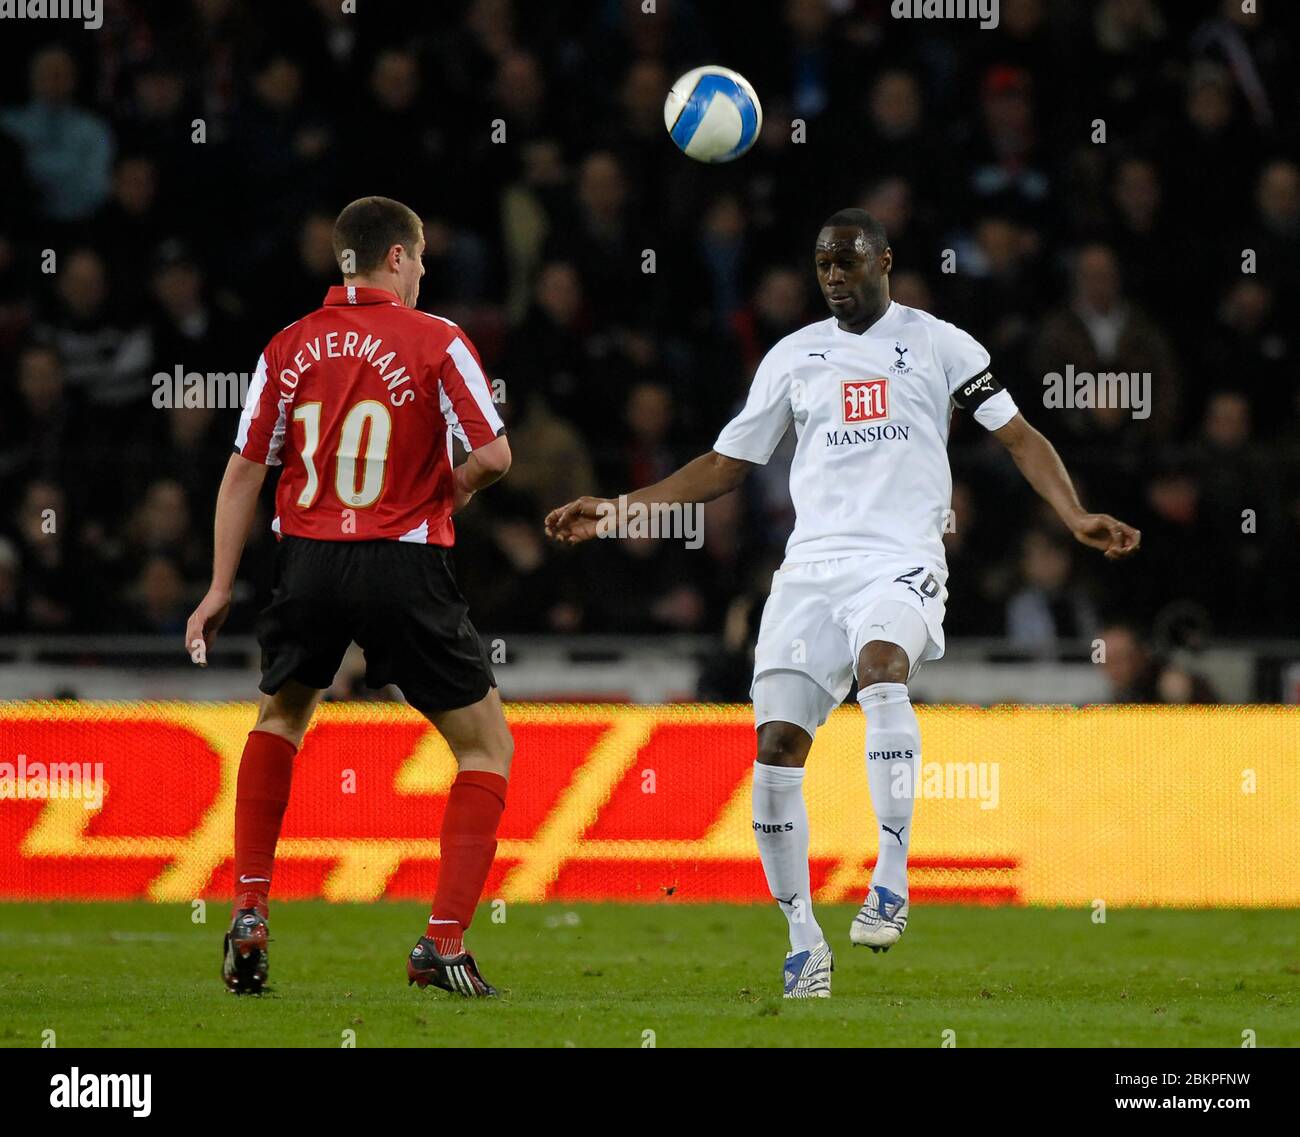 EINDHOVEN, NEDERLAND. MARCH 12: Ledley King of Tottenham Hotspur During UEFA Cup Round of 16 Second Leg between PSV Eindhoven and Tottenham Hotspur at Stock Photo